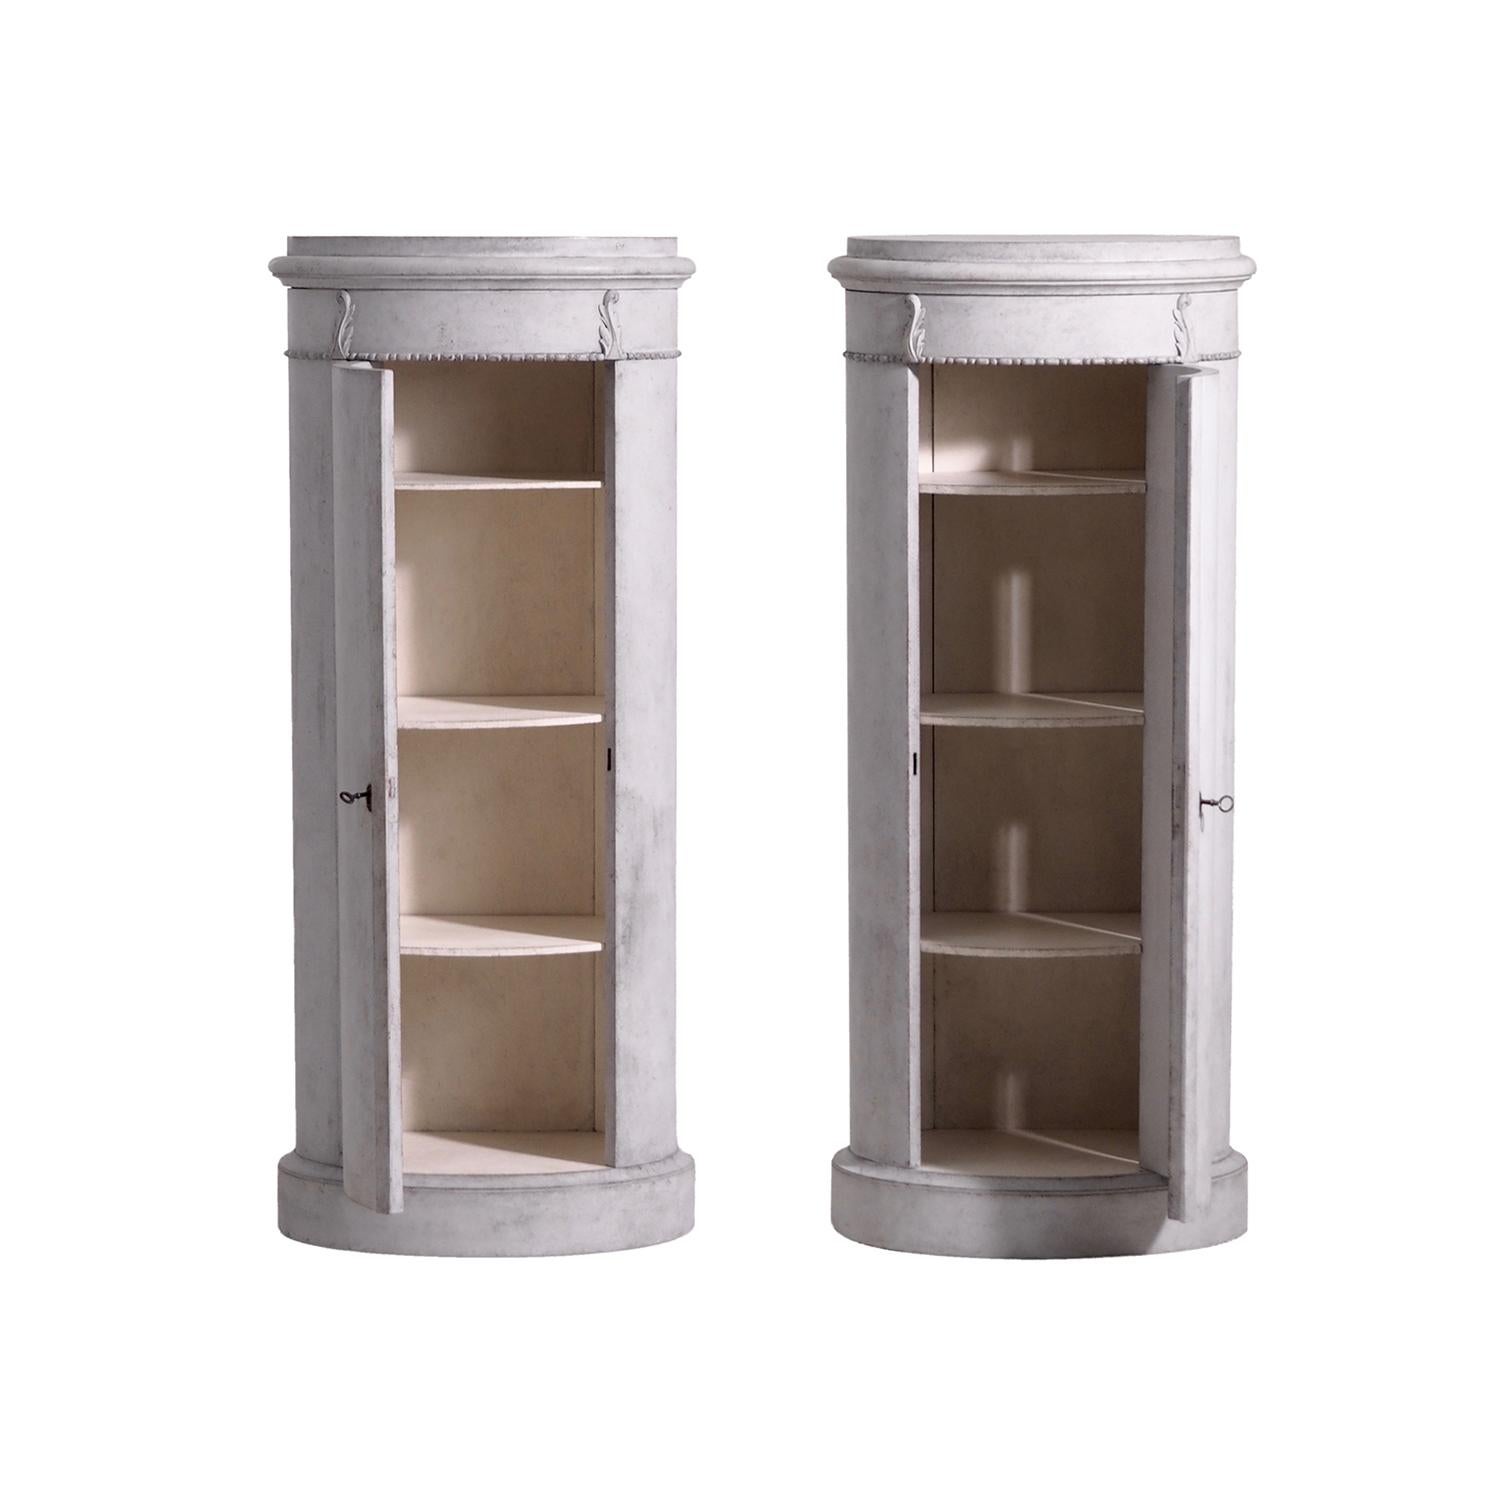 A light-grey, antique Swedish Gustavian pair of pedestal cabinets with four shelfs made of hand crafted painted Pinewood, standing on a round base, enhanced by detailed wood carvings, in good condition. The Scandinavian pair are particularized in